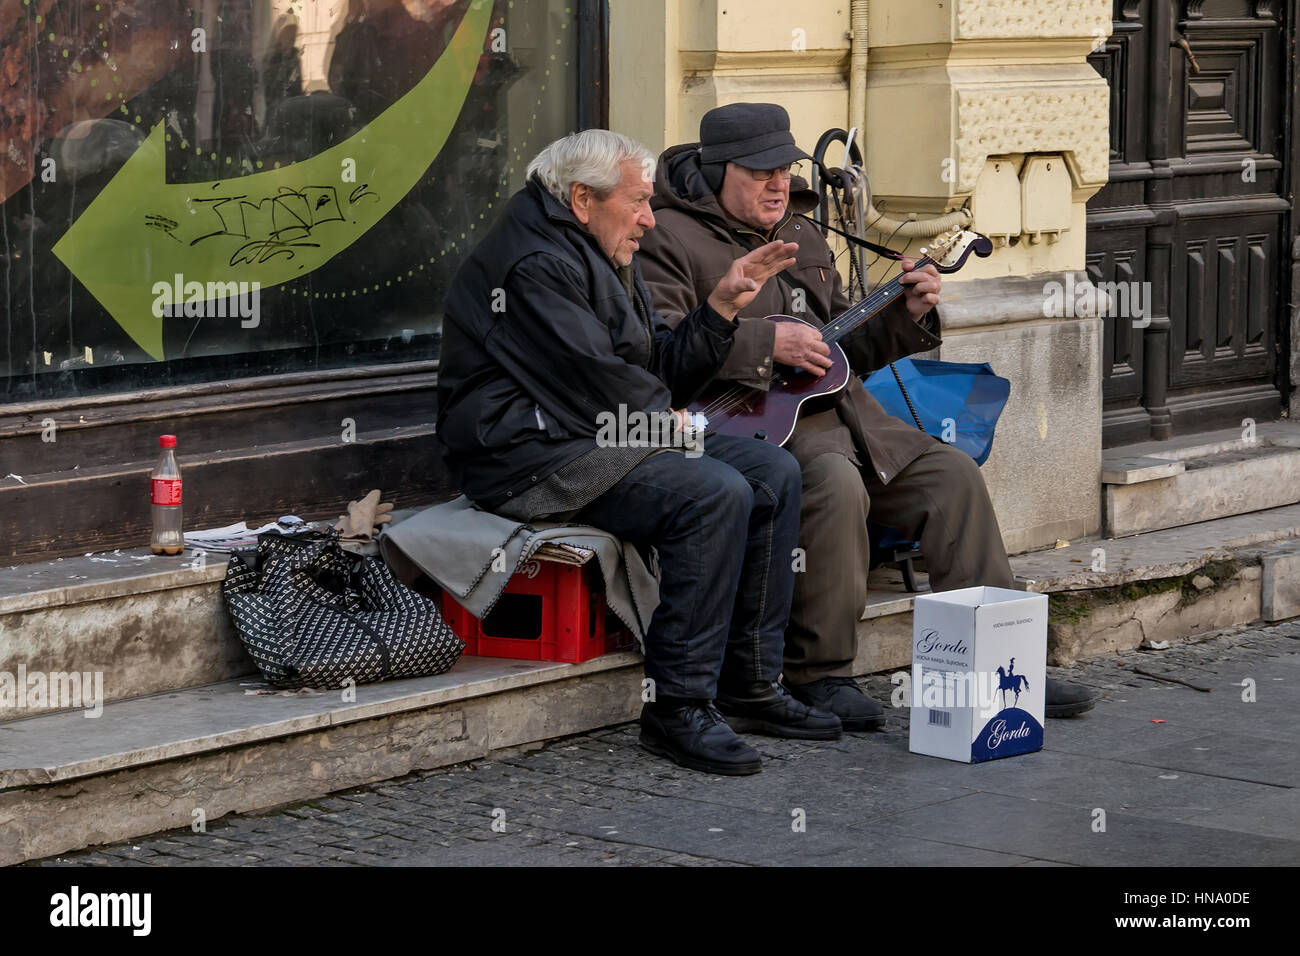 Belgrade, Serbia - February 27, 2016: Two retirees playing guitar and singing on the street Stock Photo